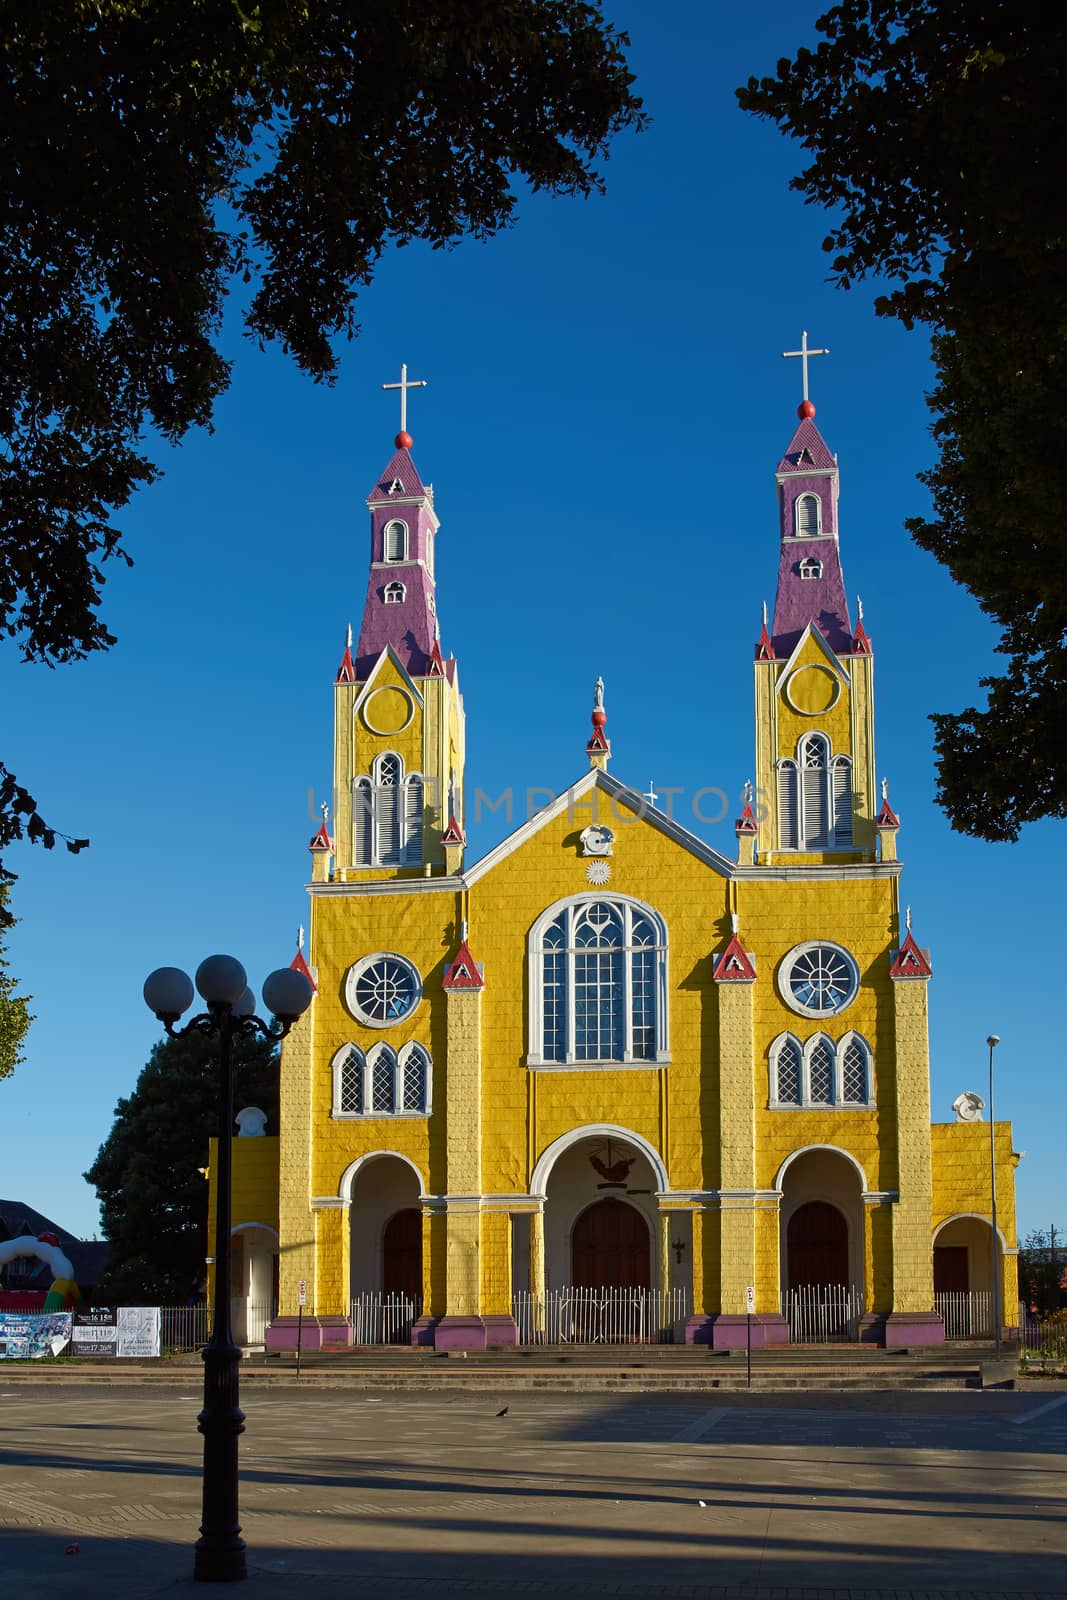 Bright yellow and purple painted facade of the historic Iglesia San Francisco in Castro, capital of the island of Chiloé in Chile.